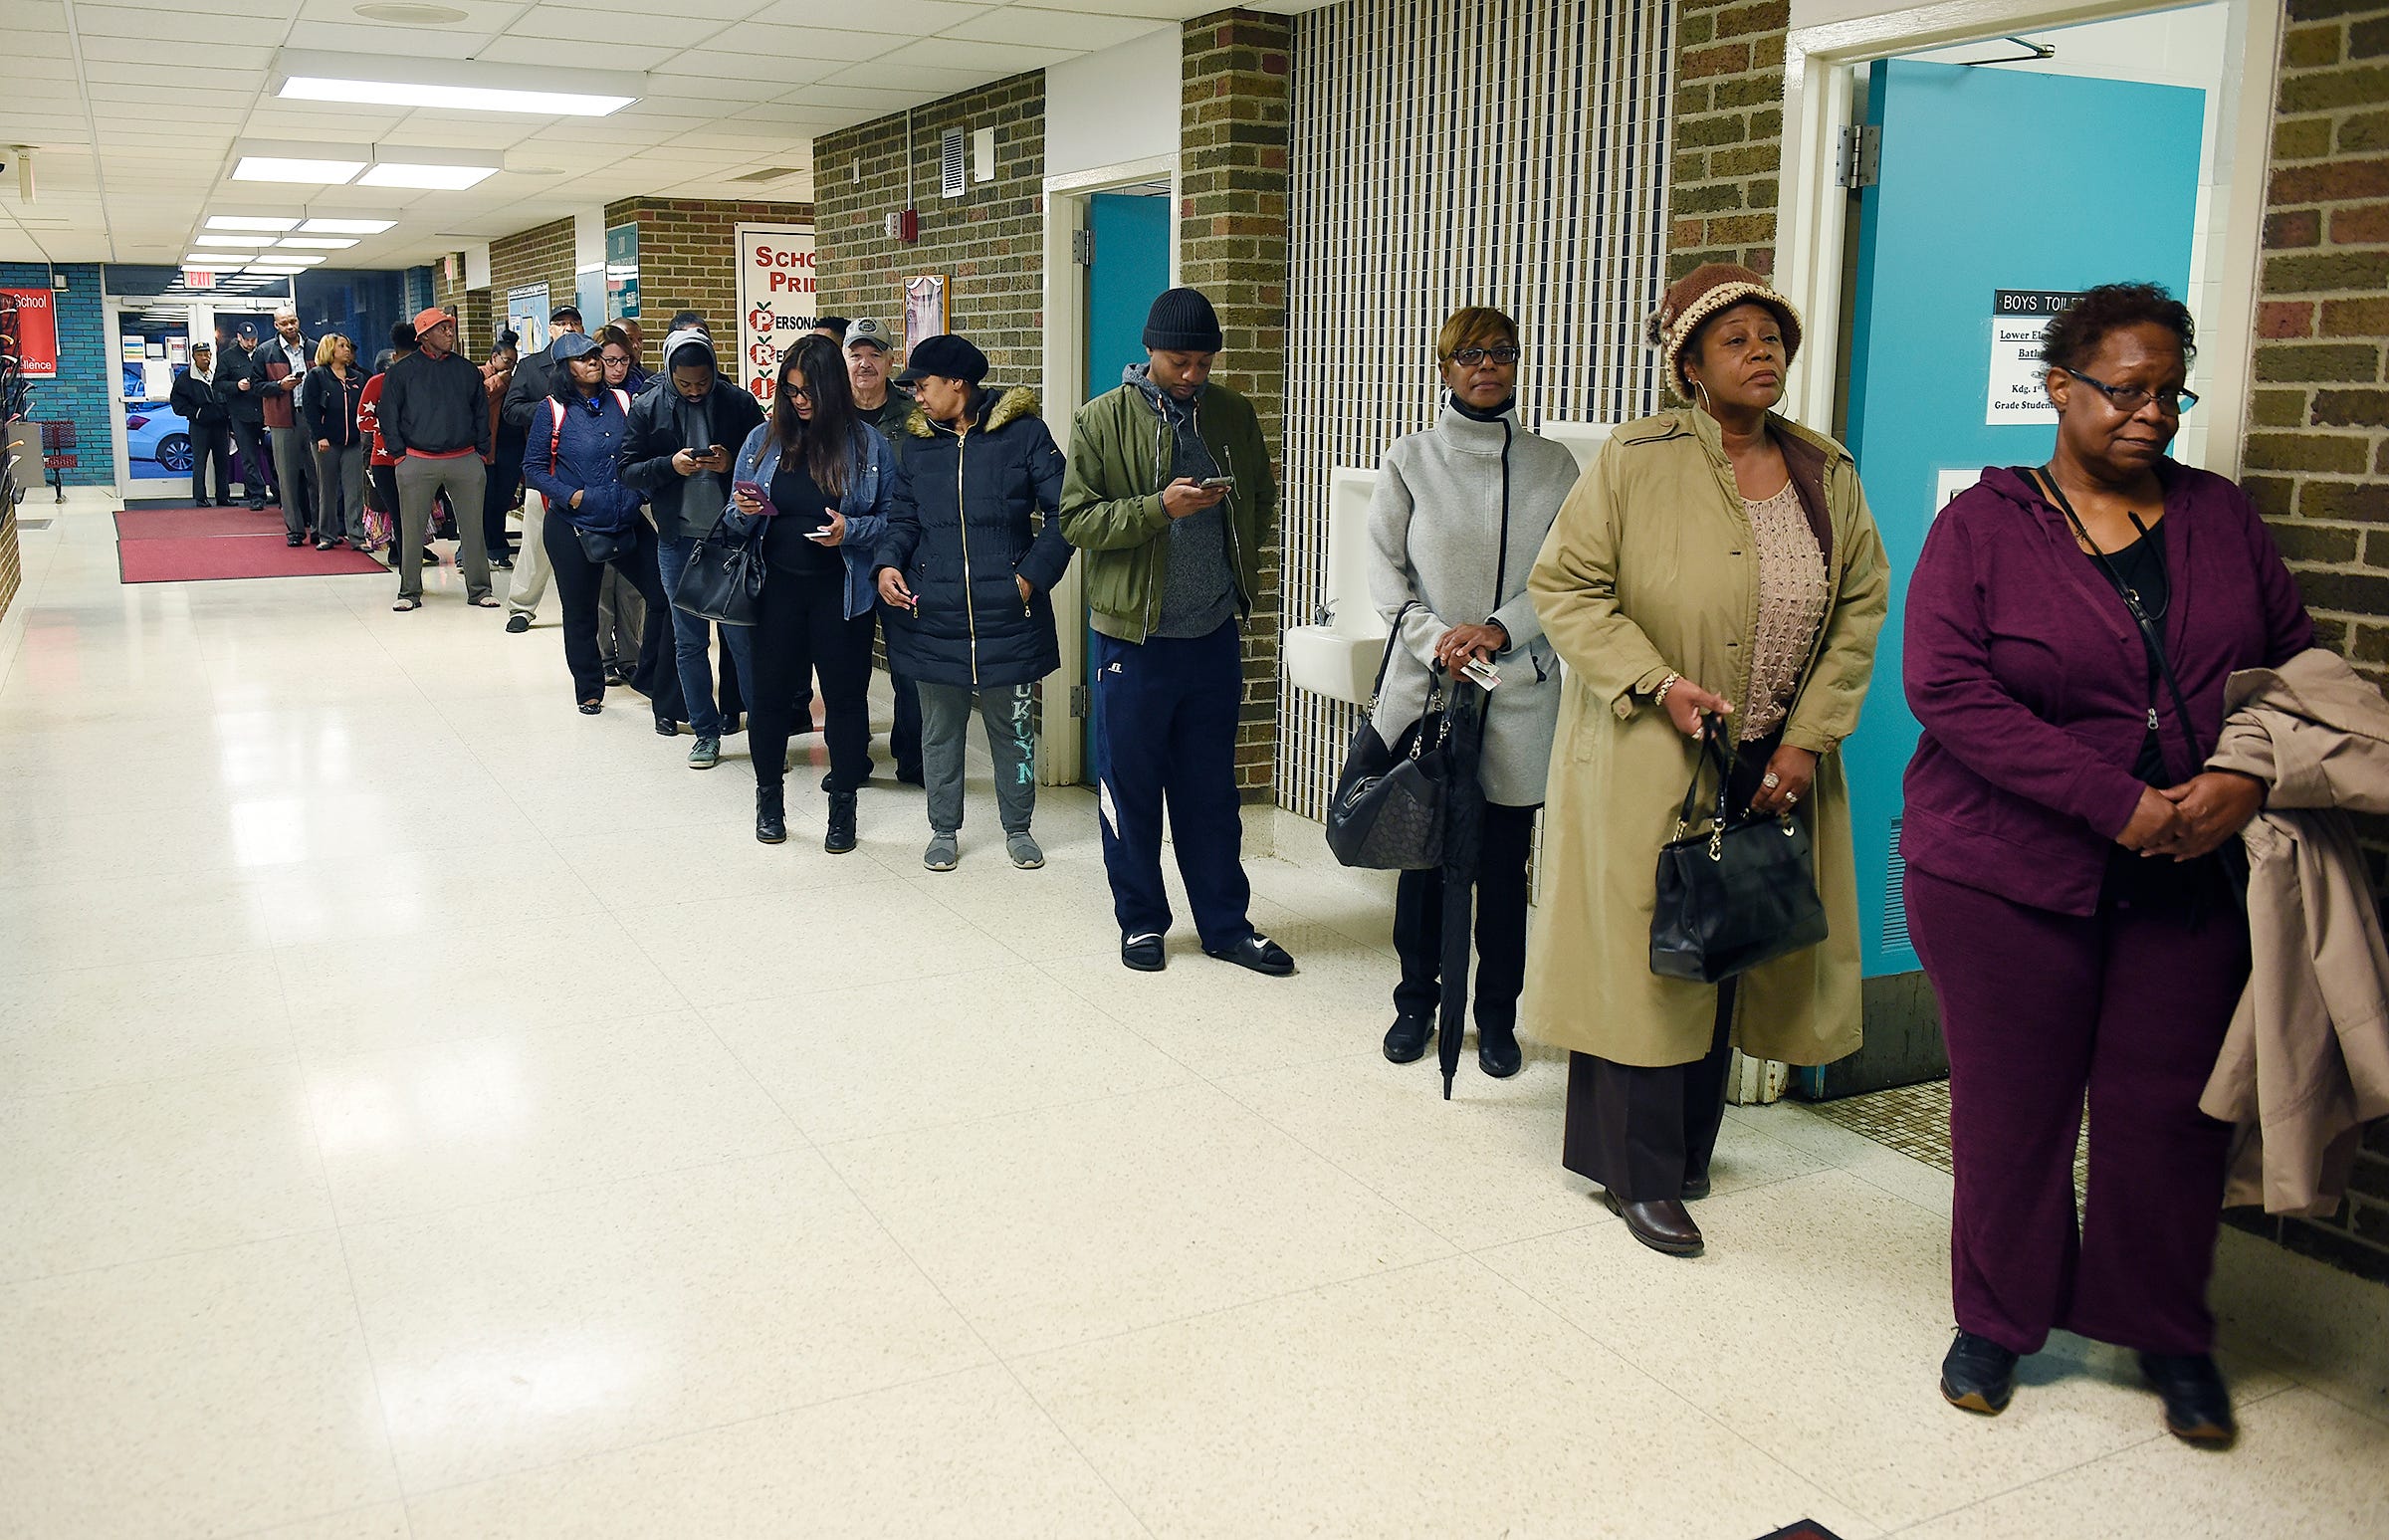 A long line of voters wait to vote Tuesday morning at Adler Elementary School in Southfield.